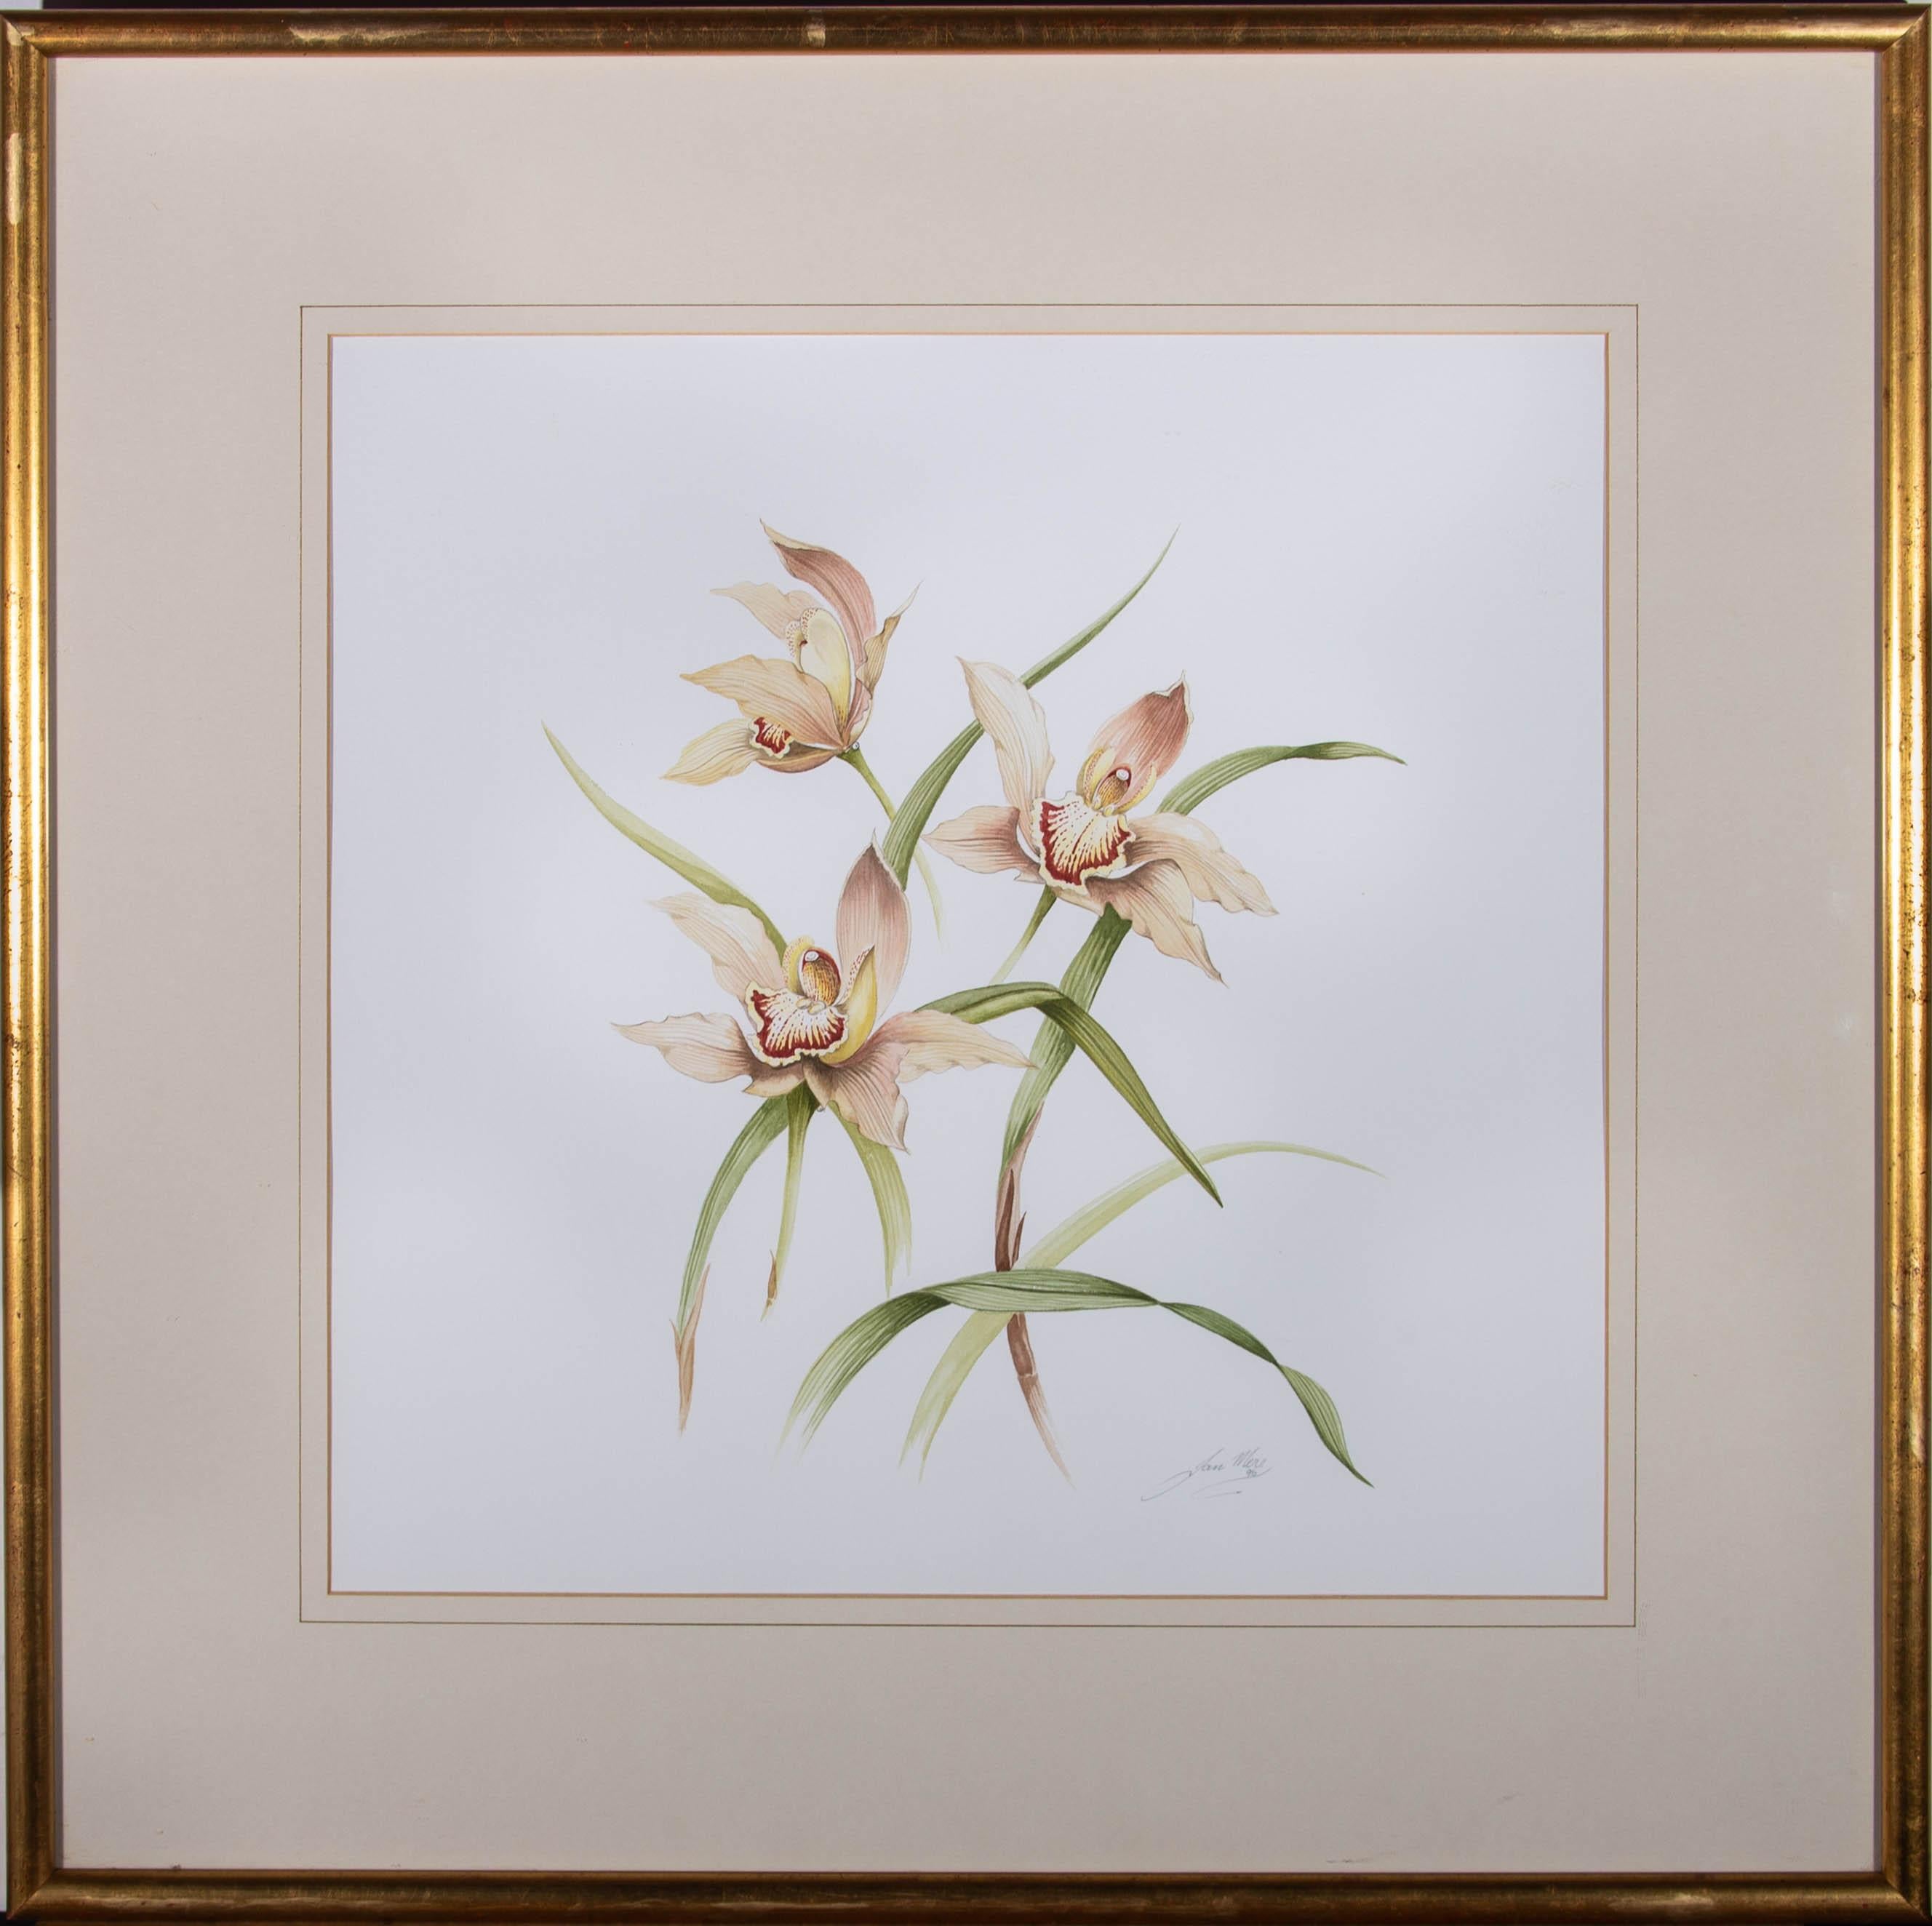 A very finely detailed botanical study of orchids in watercolour. The artist has signed and dated to the lower right and the painting has been presented in a simple gilt frame with card mount. There is a full biography of the artist attached at the